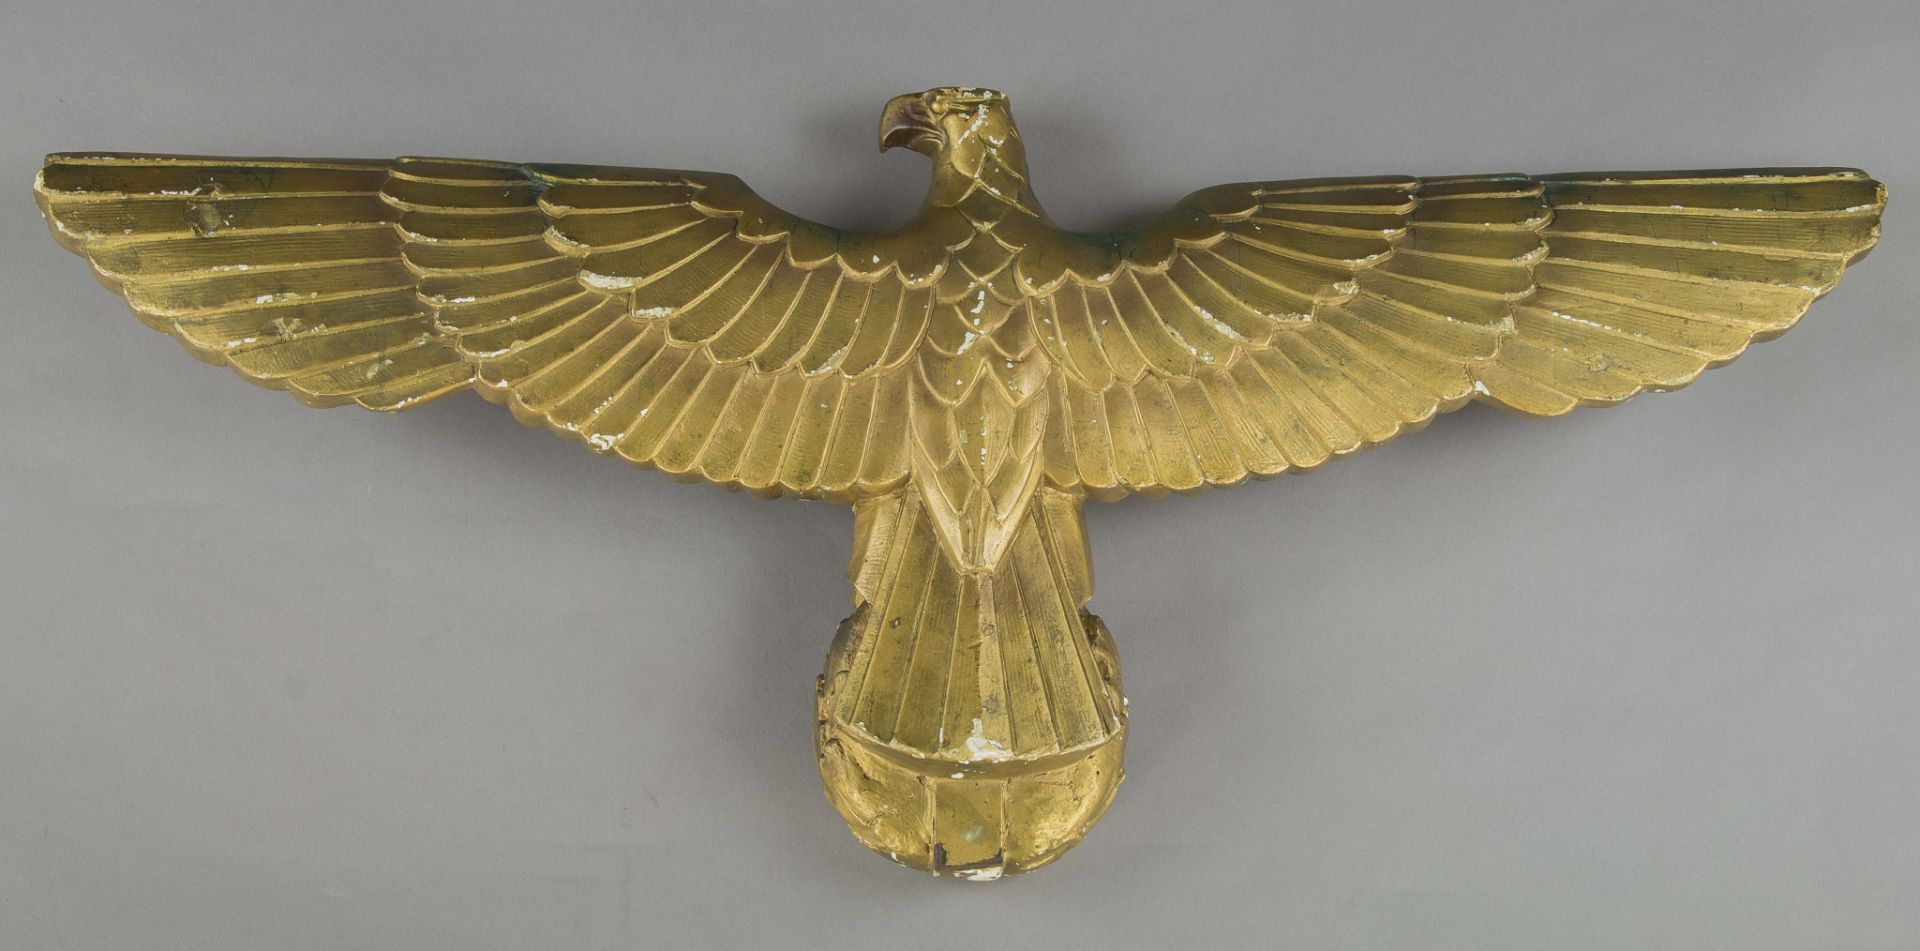 THE GOLDEN EAGLE FROM ADOLF HITLER'S REICHSCHANCELLERY BEDROOM - Image 7 of 13